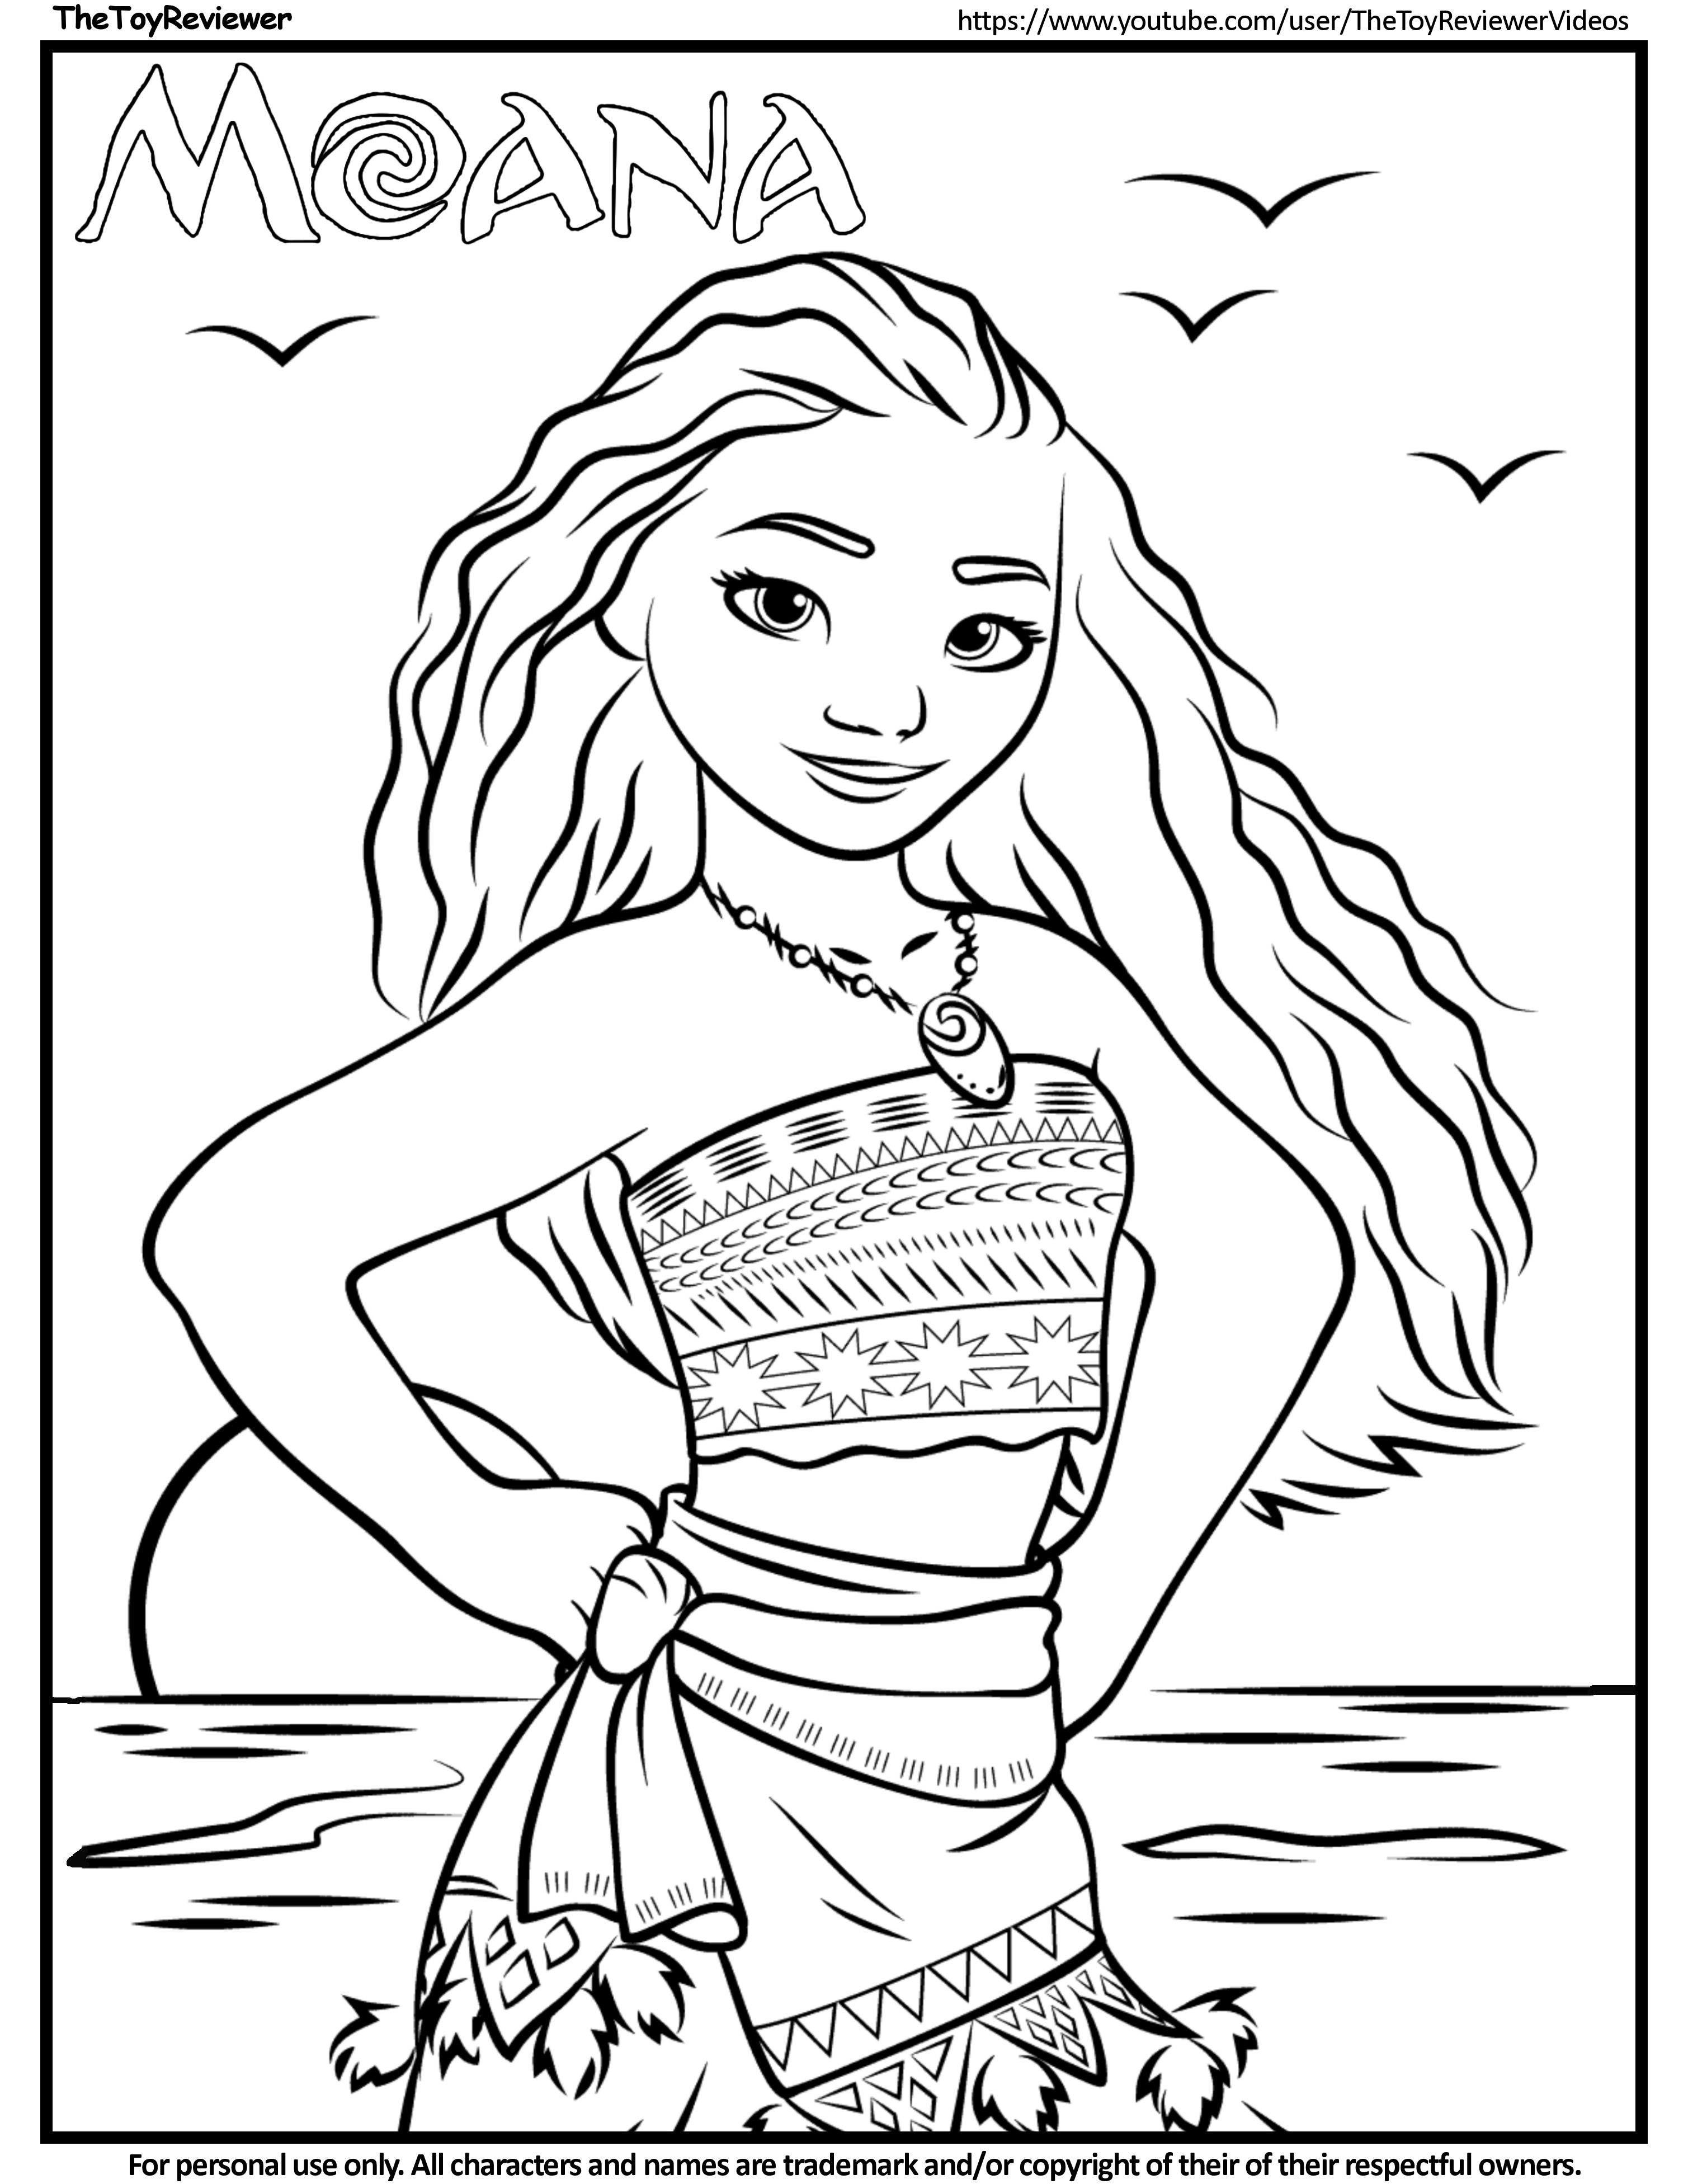 Here is the Moana Coloring Page! Click the picture to see my coloring